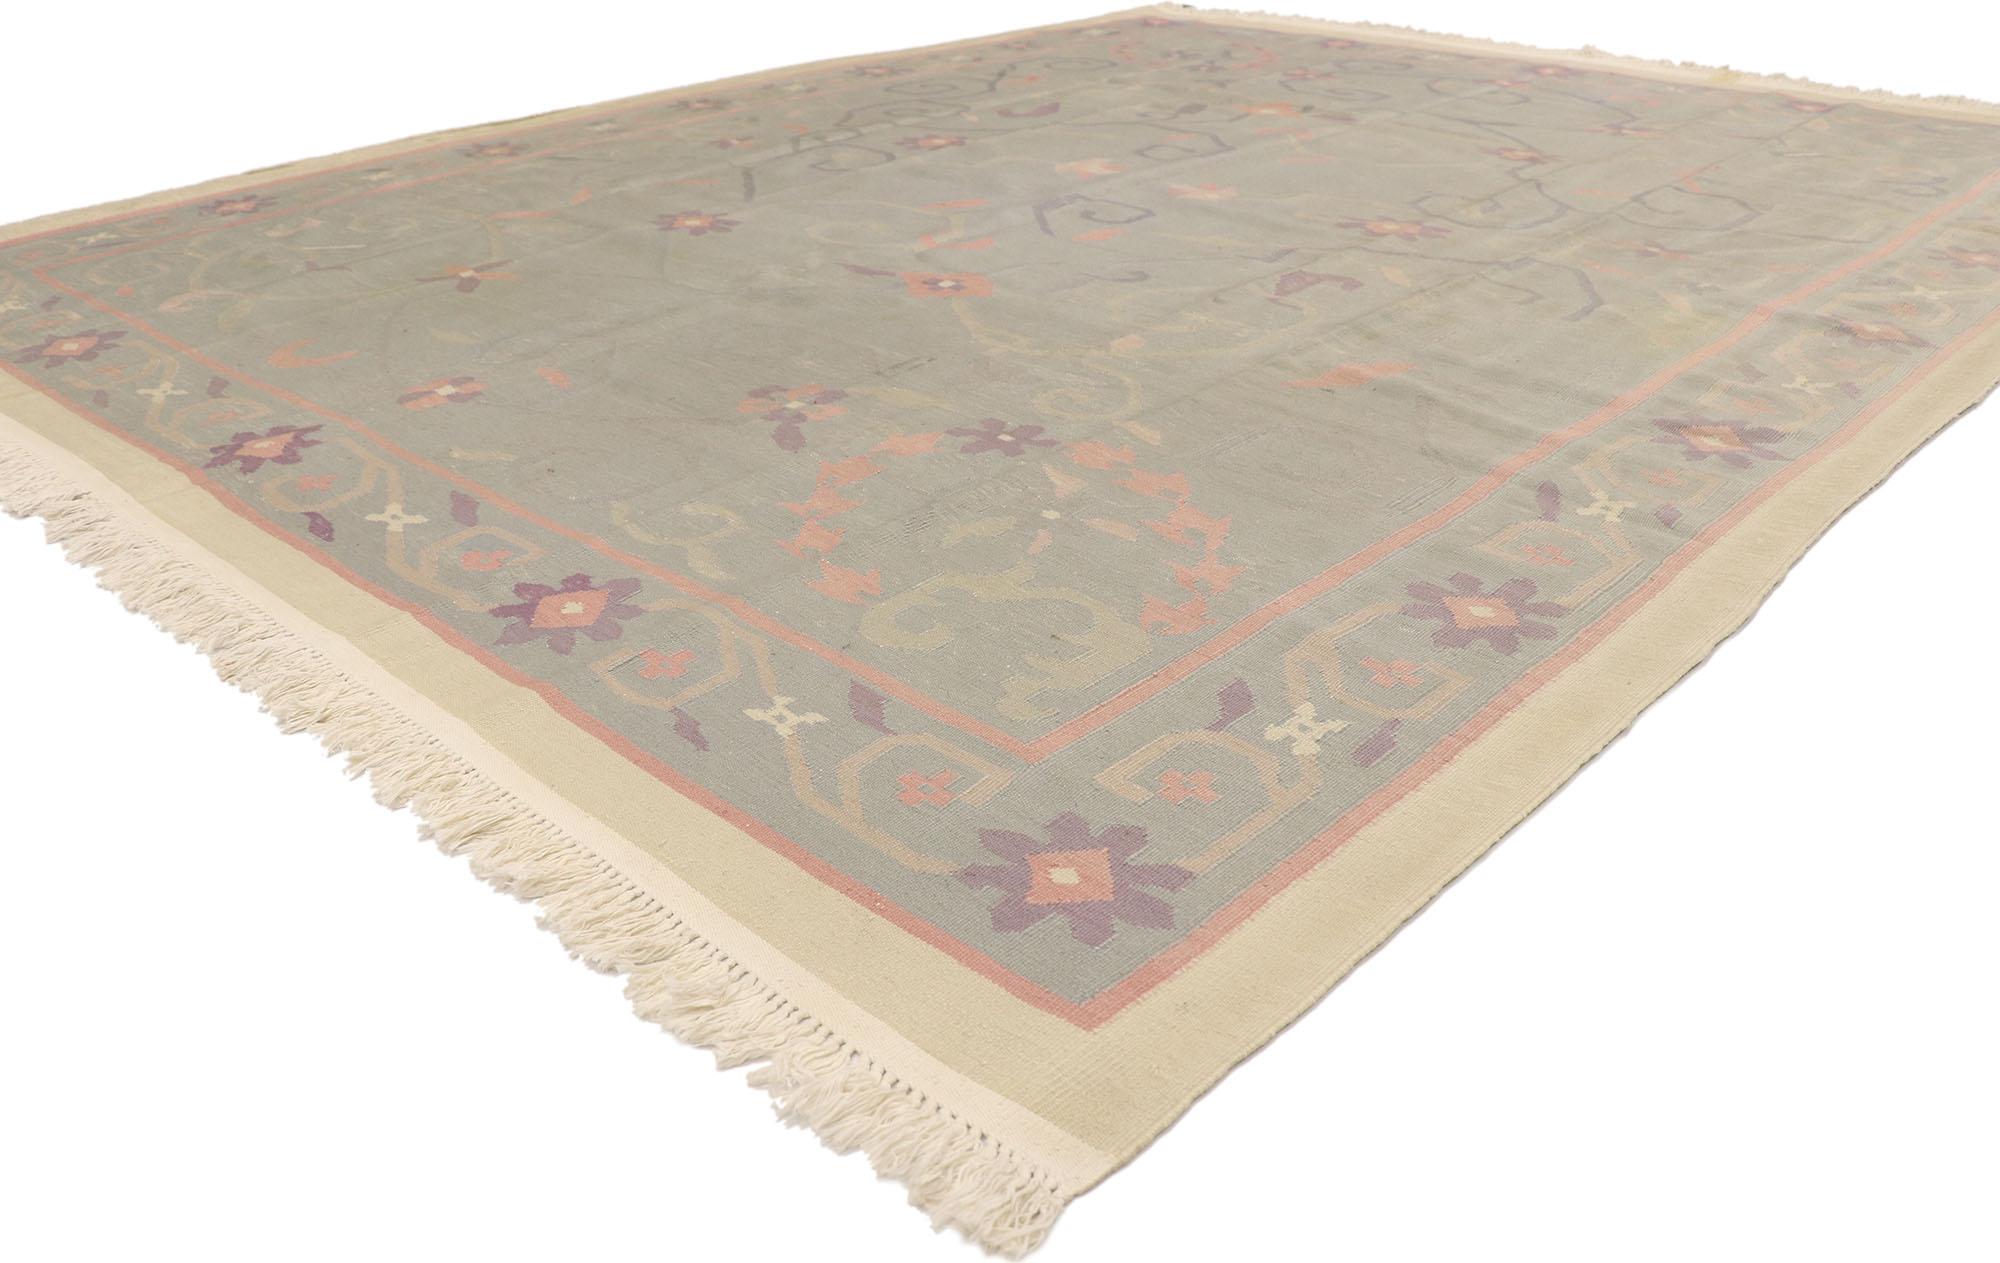 78007 Vintage Indian Dhurrie Rug, 07'11 x 09'11. Indian Dhurrie rugs are traditional, flat-woven carpets known for their lightweight, reversible design and crafted using natural fibers like cotton, wool, jute, or silk. Handmade on looms, Dhurries